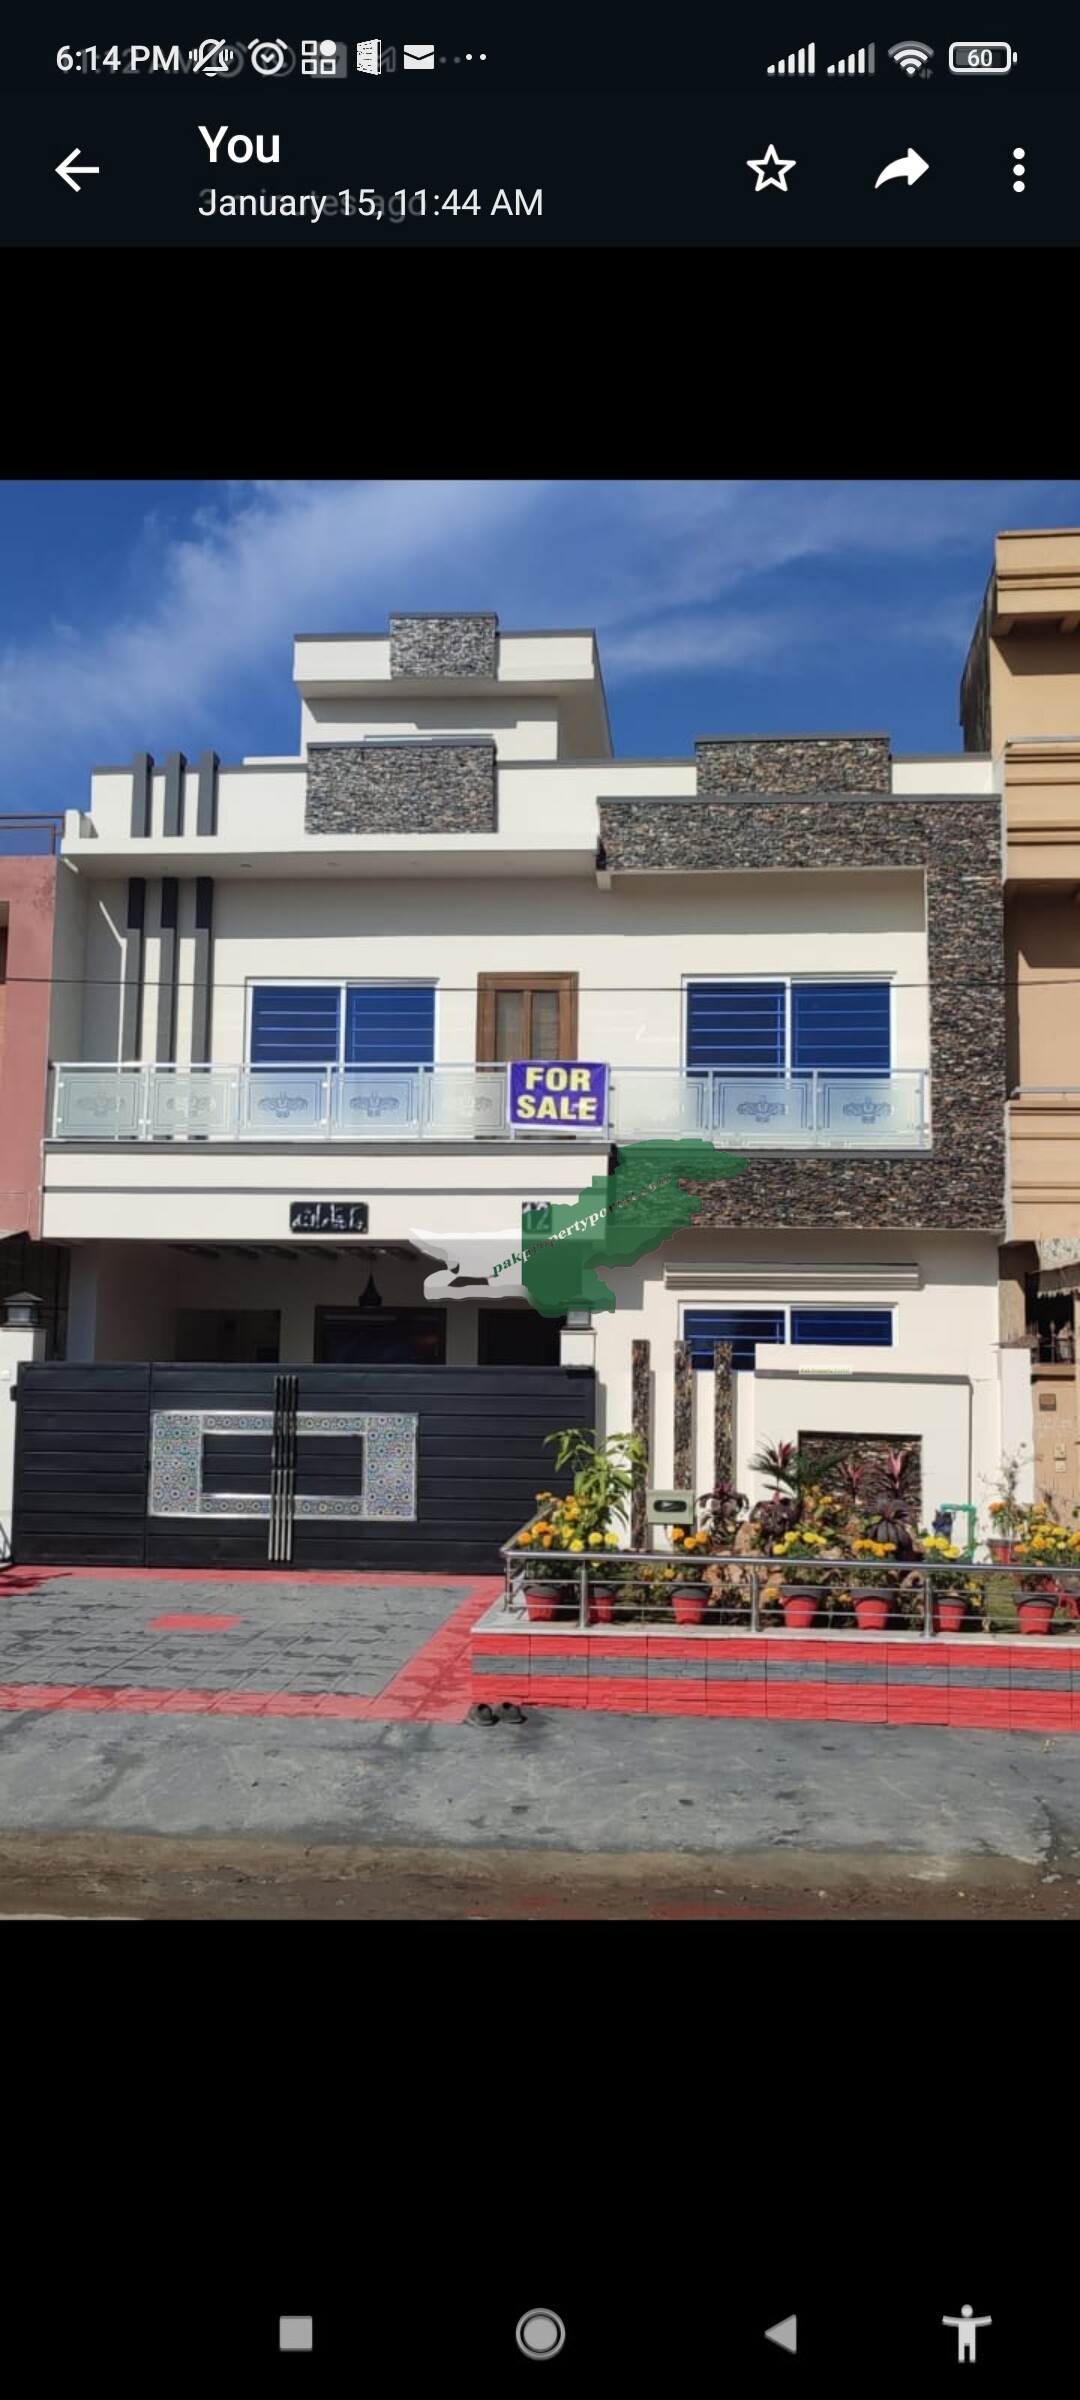 For sale house 30x60 in G 13 Islamabad